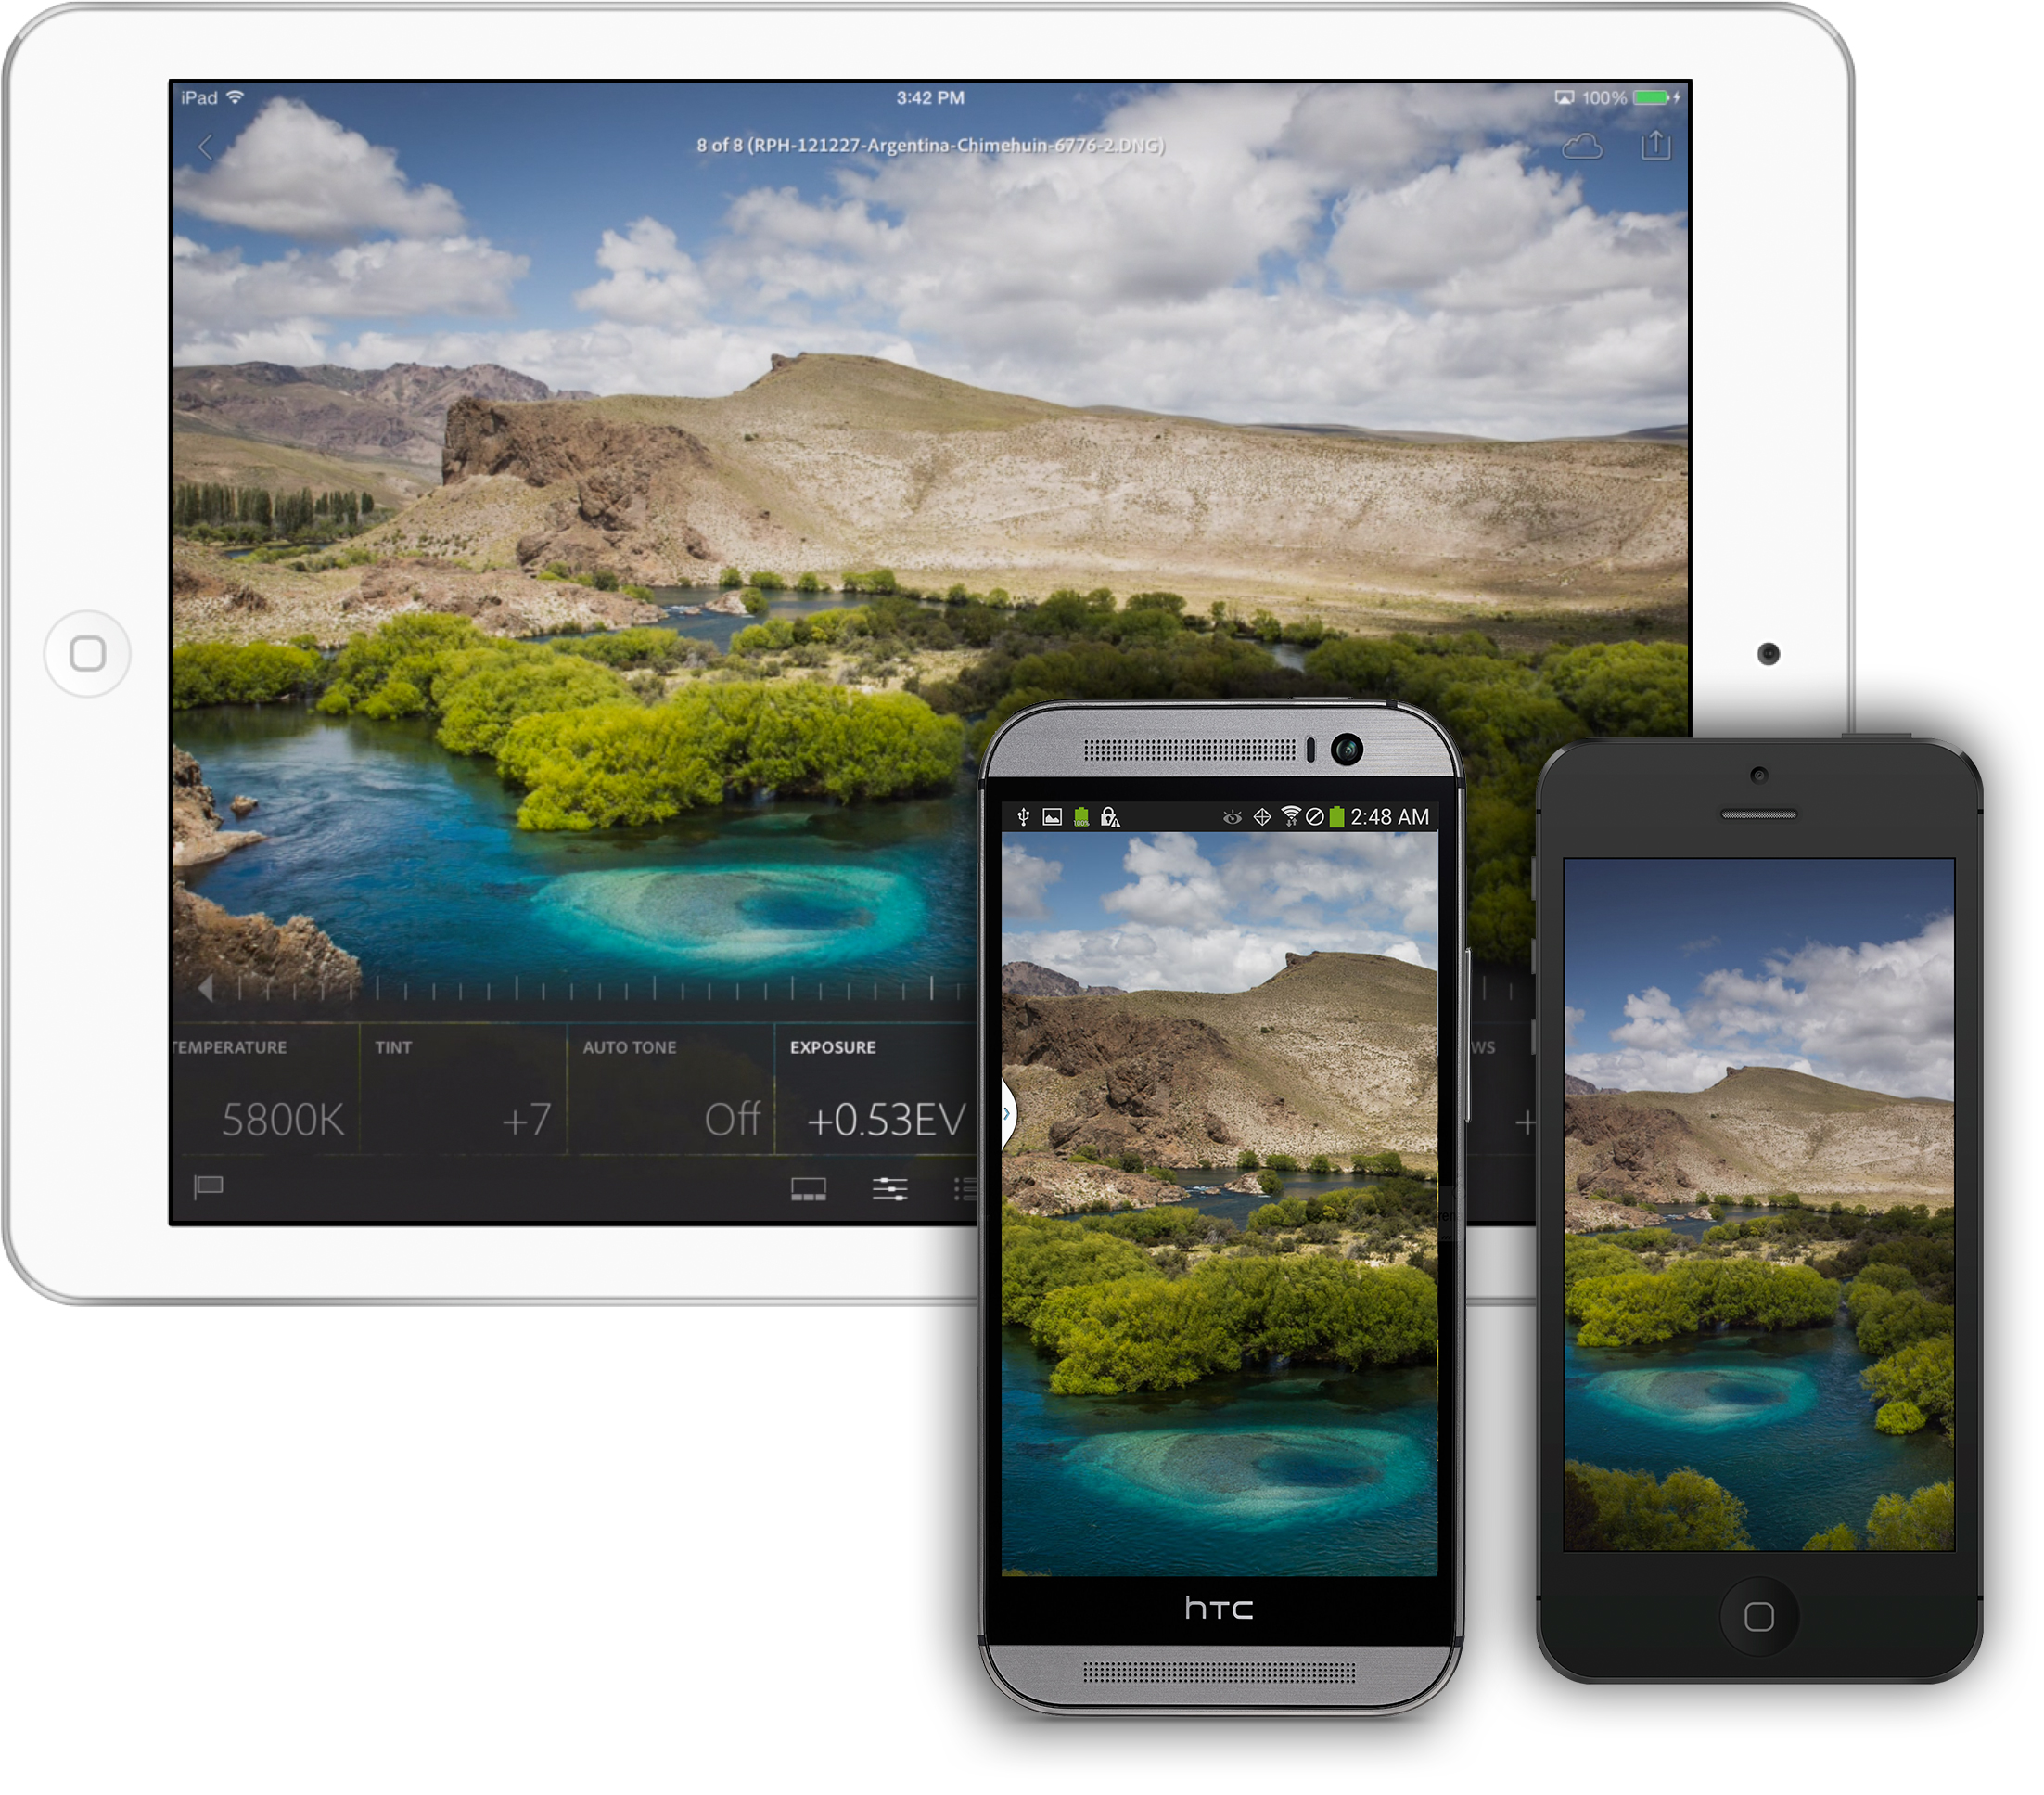 Lightroom Mobile Finally Available on Android Devices